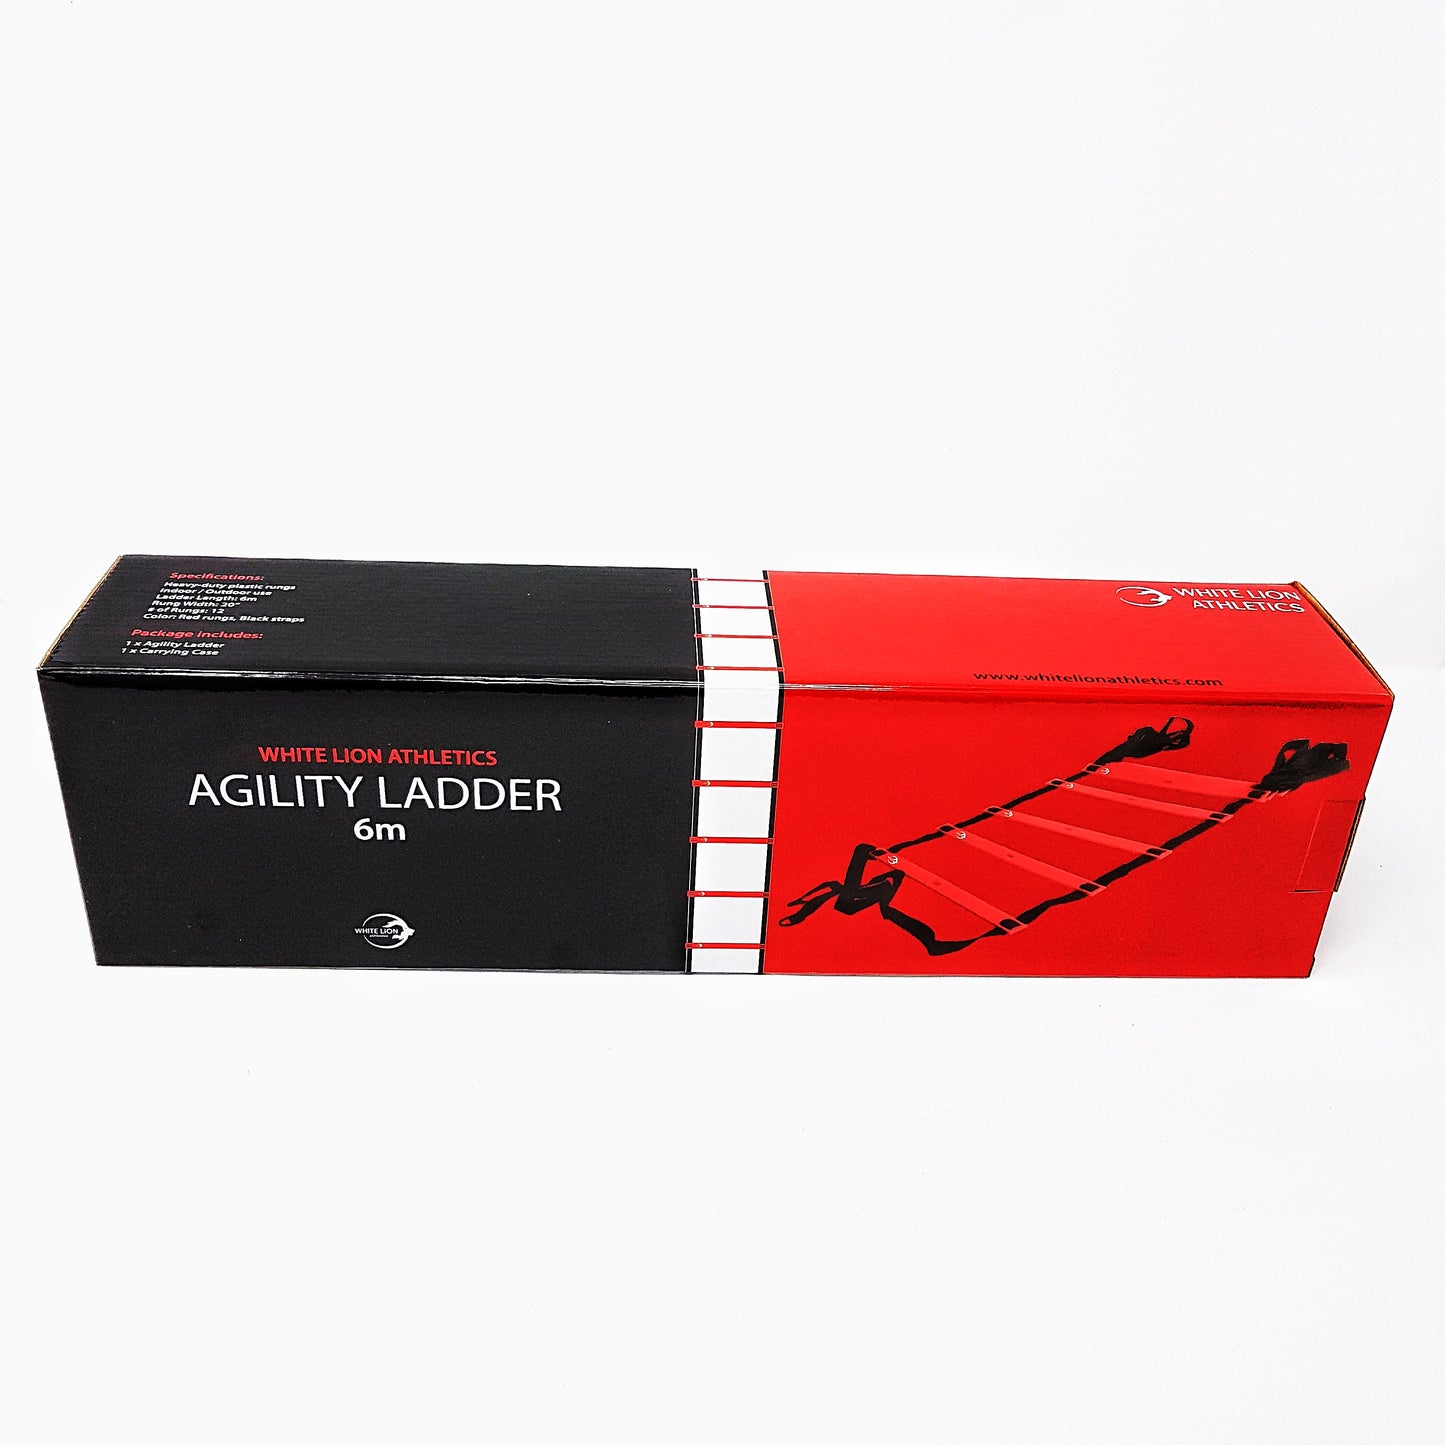 The Product box for the 6 meter Agility Ladder  with Carry Bag Included  by White Lion Athletics.